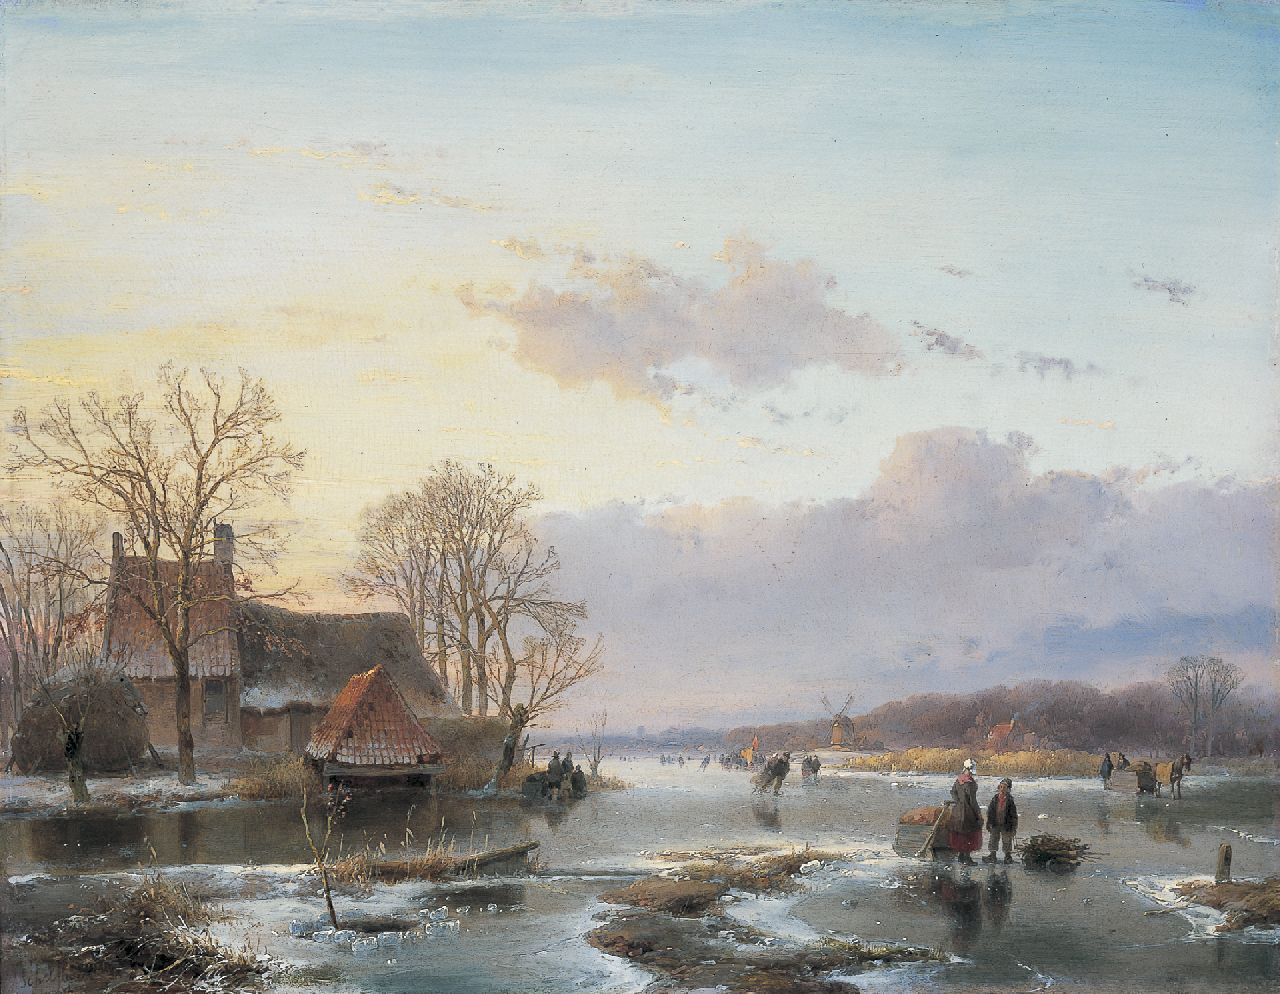 Schelfhout A.  | Andreas Schelfhout, Skaters on a frozen polder canal, oil on panel 37.6 x 48.4 cm, signed l.l. and painted circa 1845